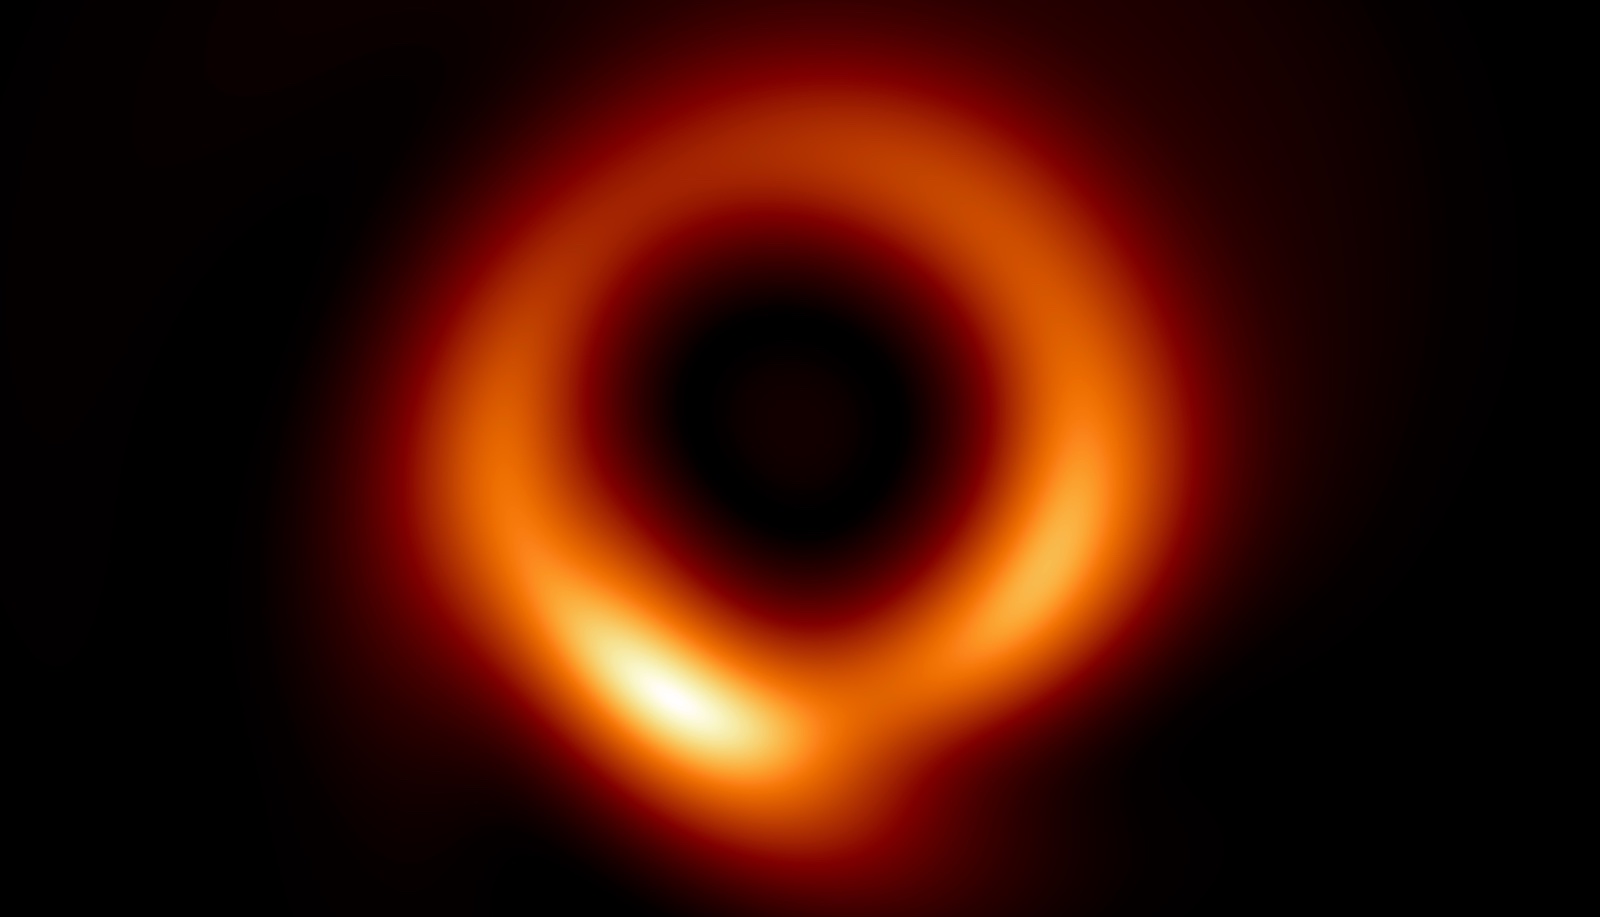 First-ever close-up of a supermassive black hole sharpened to